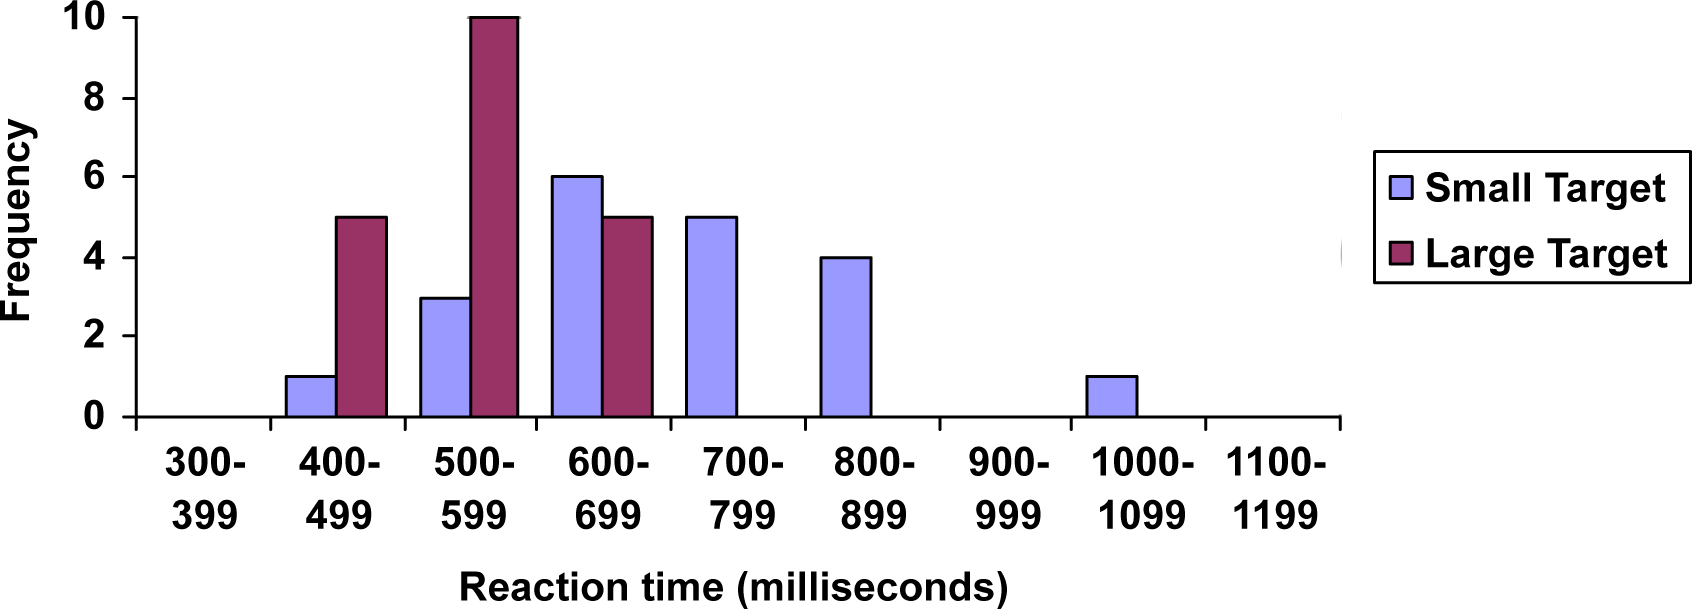 A comparitive bar graph.  The horizontal axis is labeled Reaction time (milliseconds) and the vertical is labeled Frequency.  The horizontal axis is divided into spaces labled with the class definitions, like 300-399 for the first, and 400-499 for the second.  In each space, there are two bars next to each other; the first is labeled small target and the second is labeled large target, and the heights correspond to the frequency values for each group.